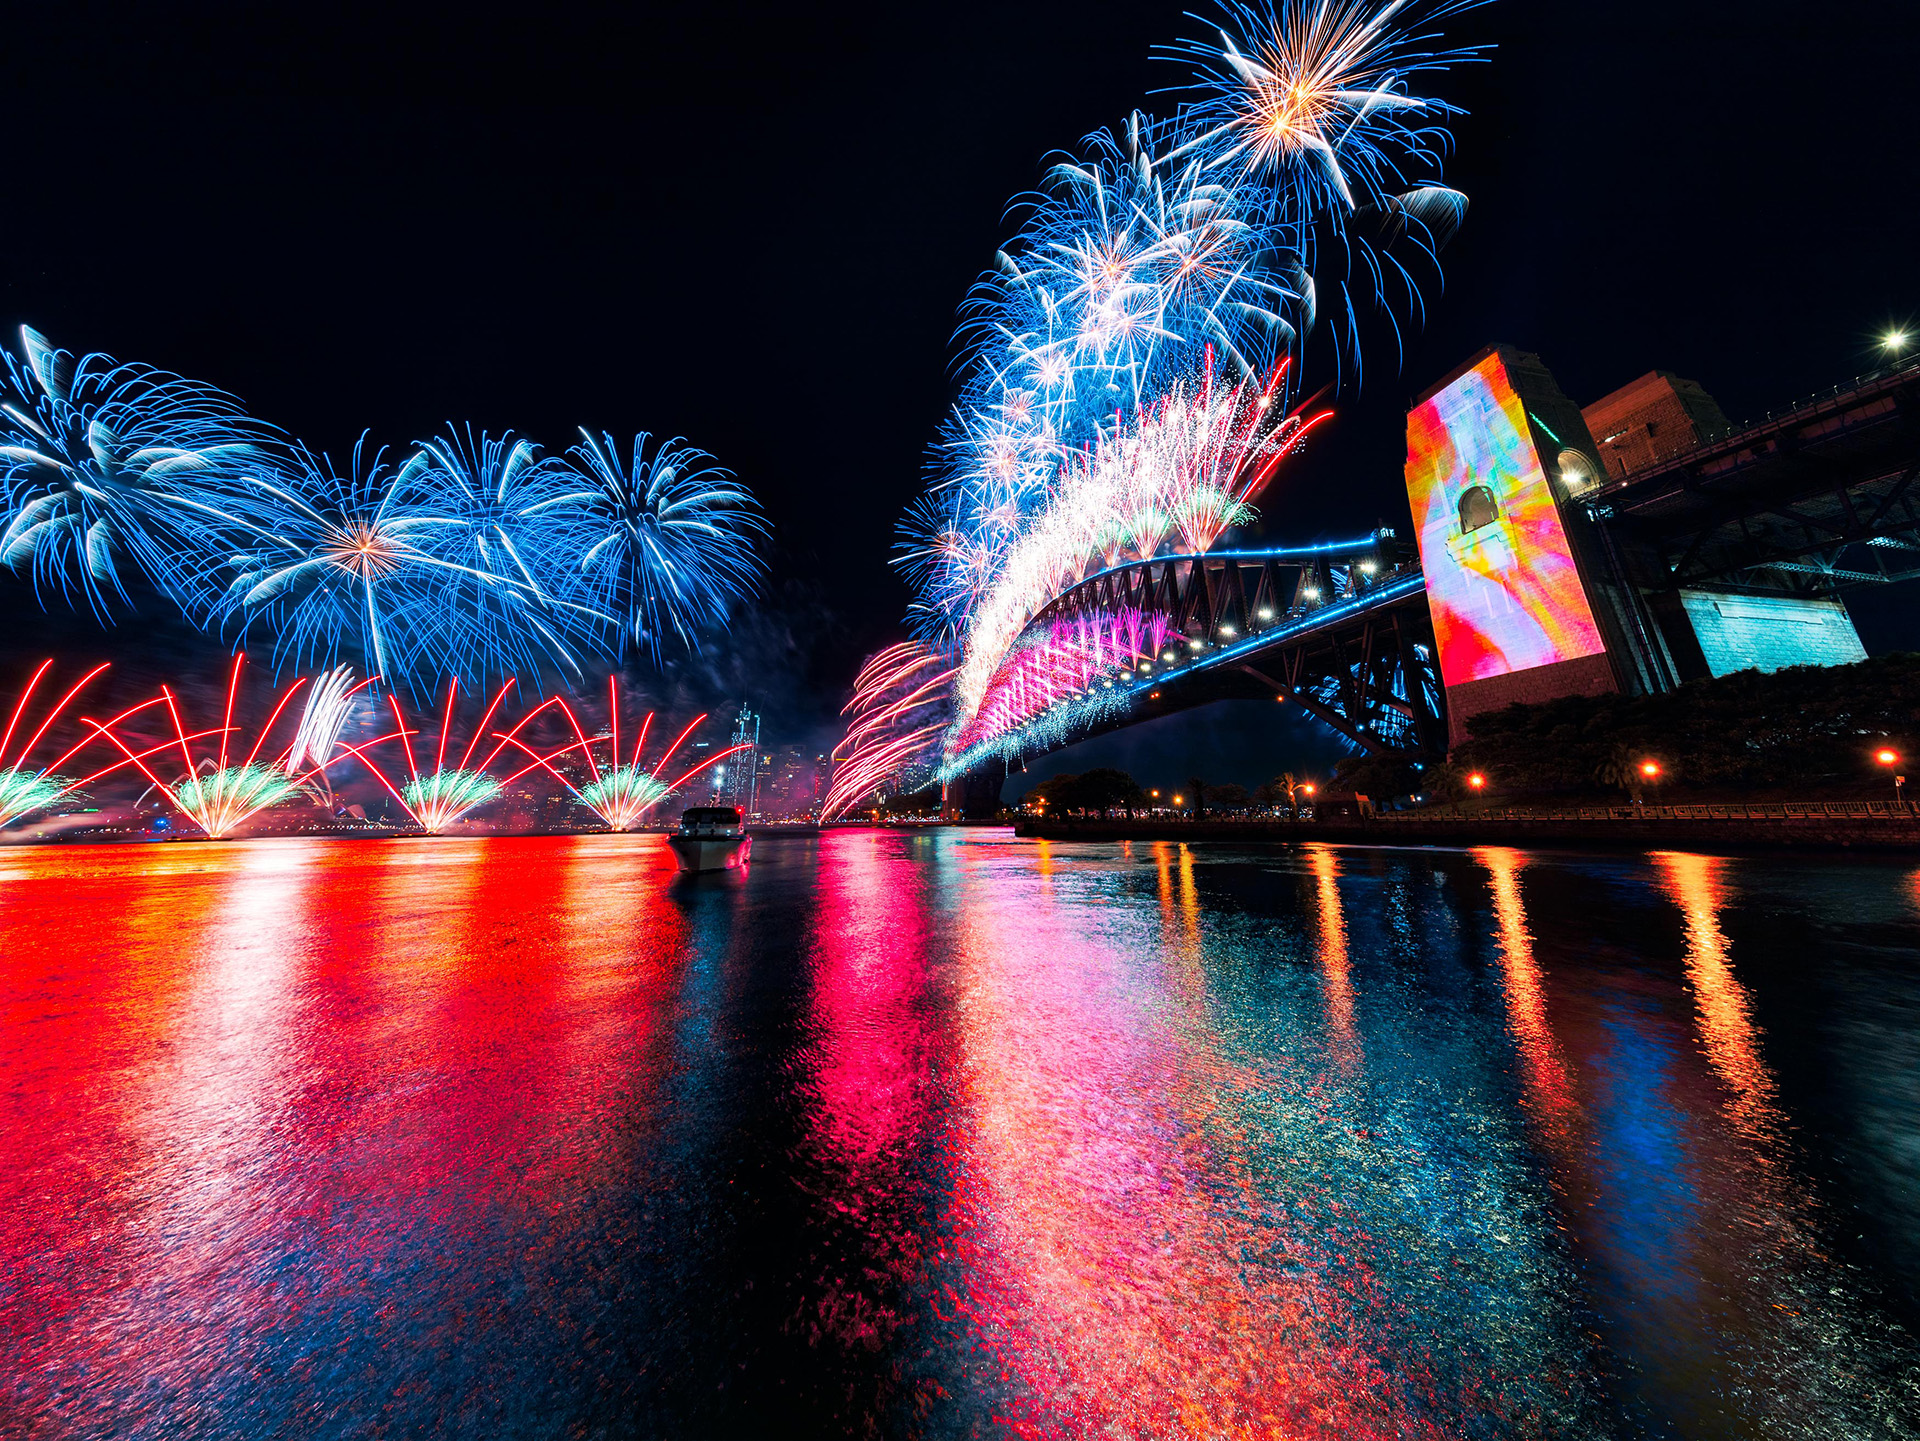 Animated visuals projected onto the Sydney Harbour Bridge, flanked by fireworks, for New Years Eve 2021